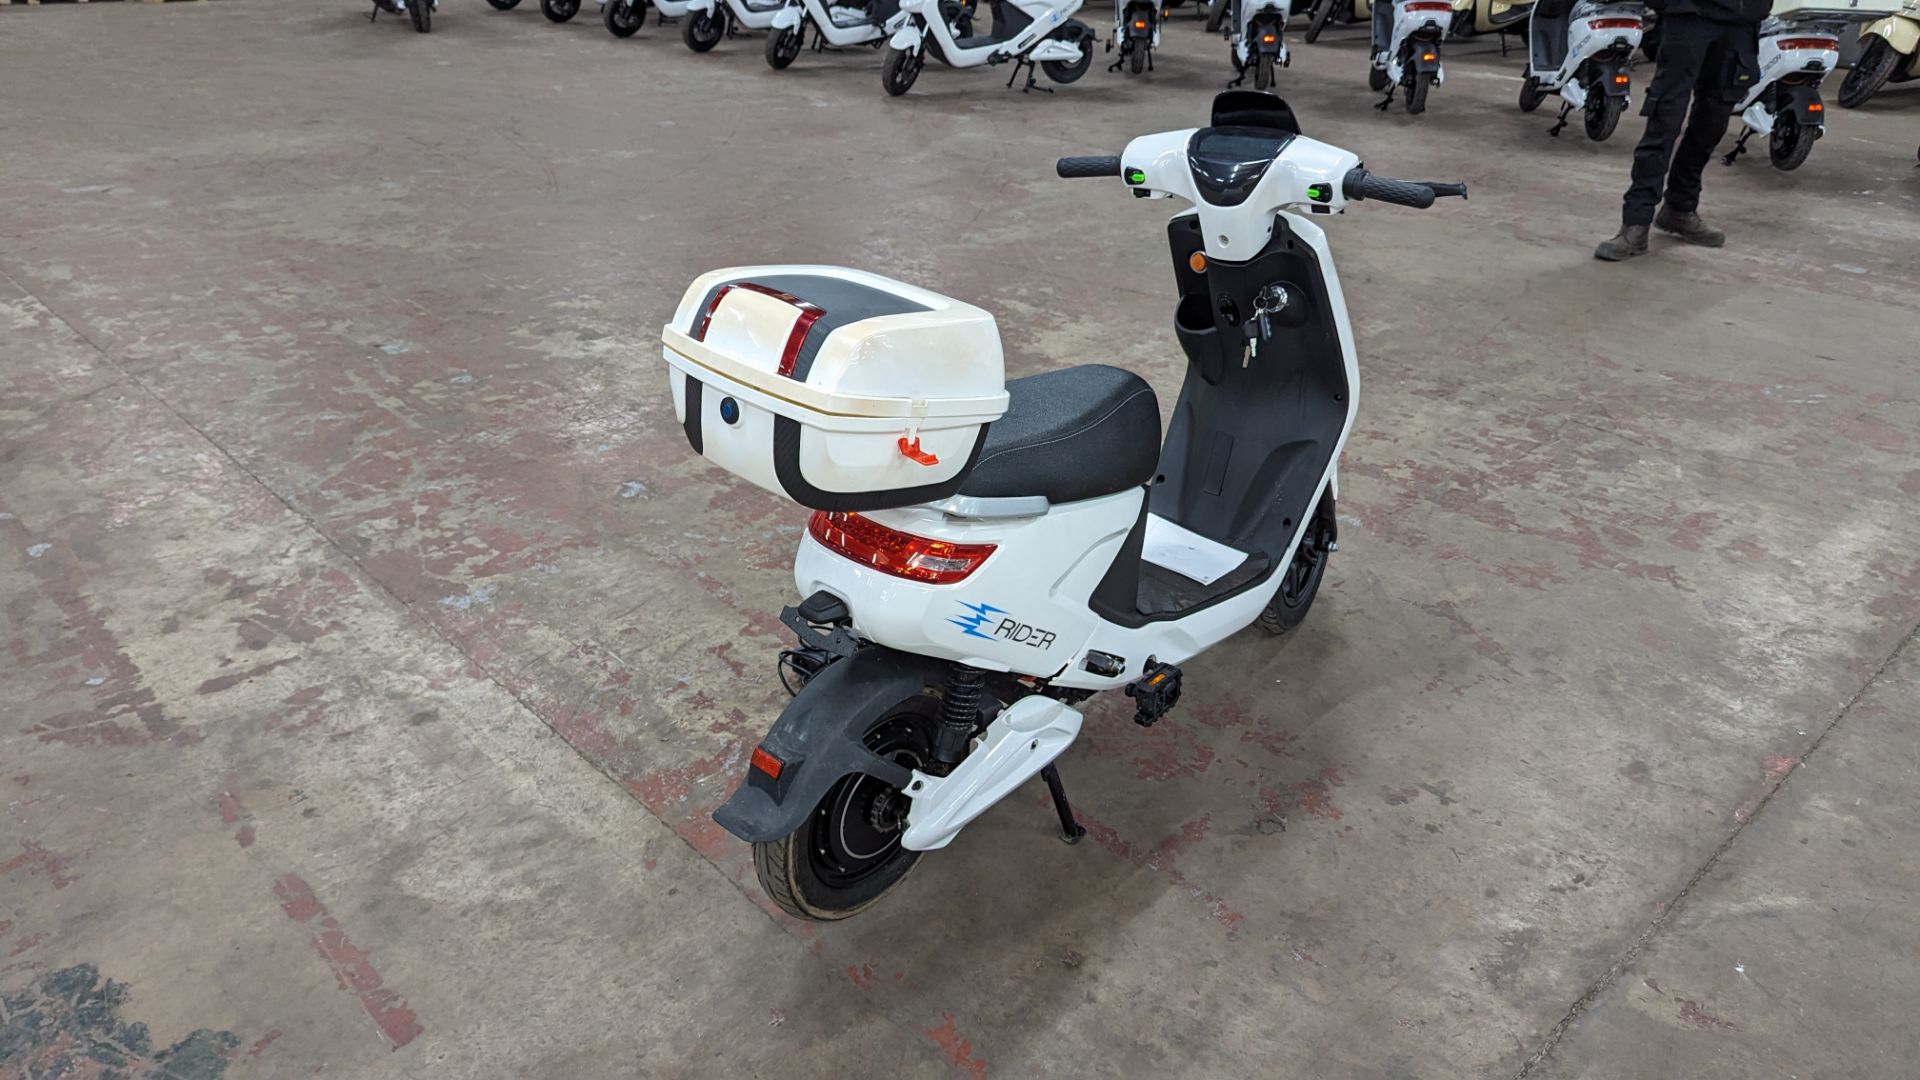 Model 18 Electric Bike: Used/low miles, white body with black detailing. This bike is not brand new, - Image 5 of 13